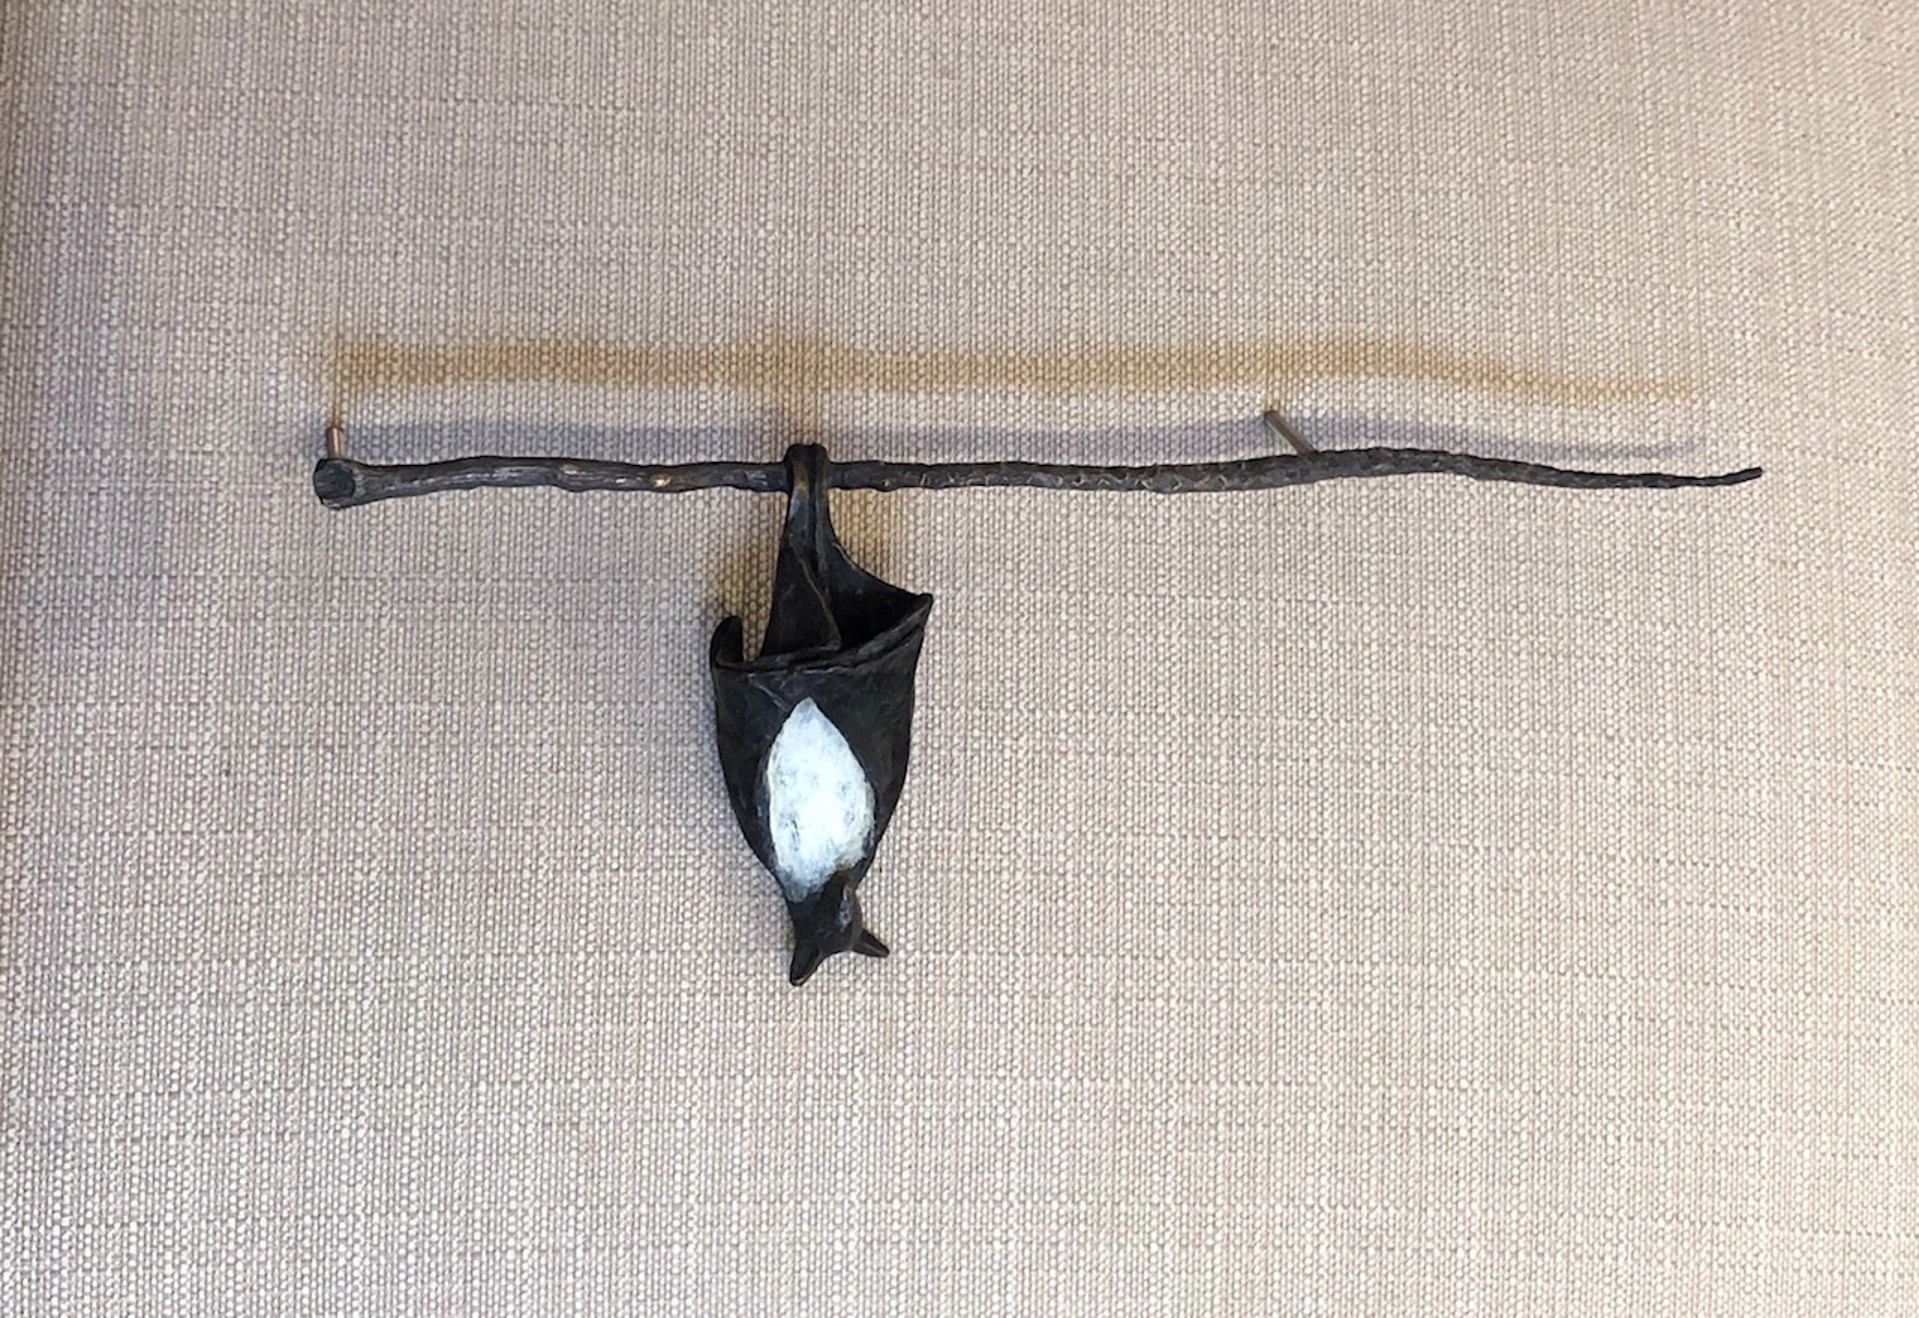 1 Temple Bat on a Branch, hangs from the left side by Copper Tritscheller